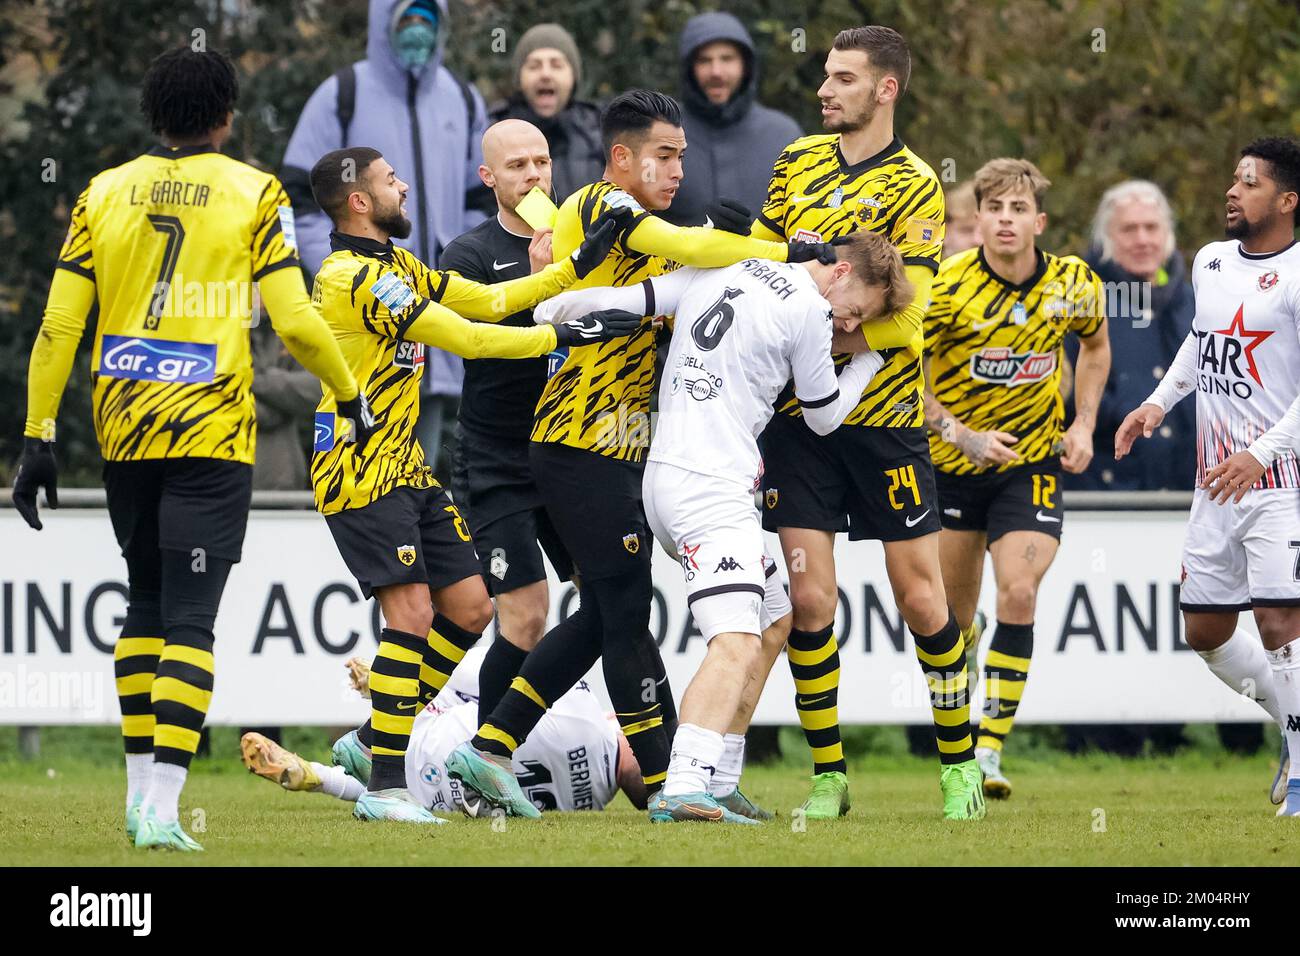 BURGH-HAAMSTEDE, NETHERLANDS - DECEMBER 4: Sergio Araujo of AEK Athens, Mathieu Cachbach RFC Seraing and Gerasimos Mitoglou of AEK Athens during the Friendly match between AEK Athens and RFC Seraing at Sportpark van Zuijen on December 4, 2022 in Burgh-Haamstede, Netherlands (Photo by Broer van den Boom/Orange Pictures) Stock Photo